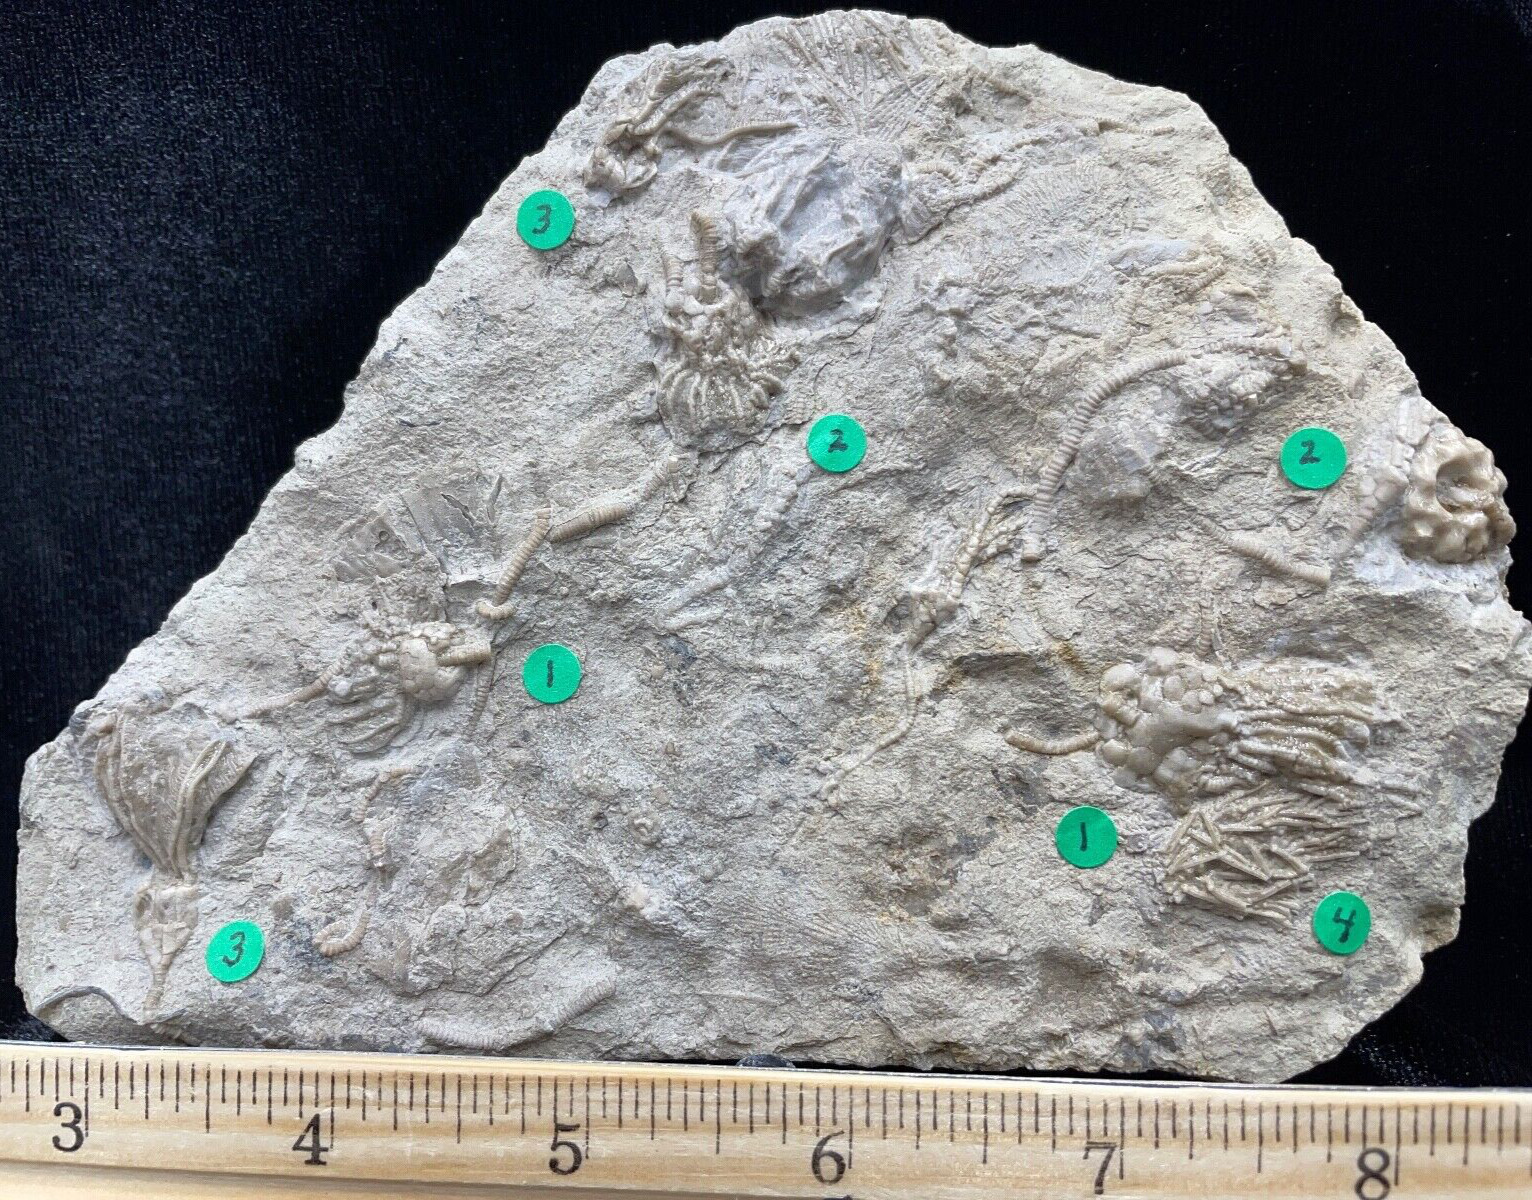 Four Swirling Fossil Crinoids in Plate, Gilmore City, IA